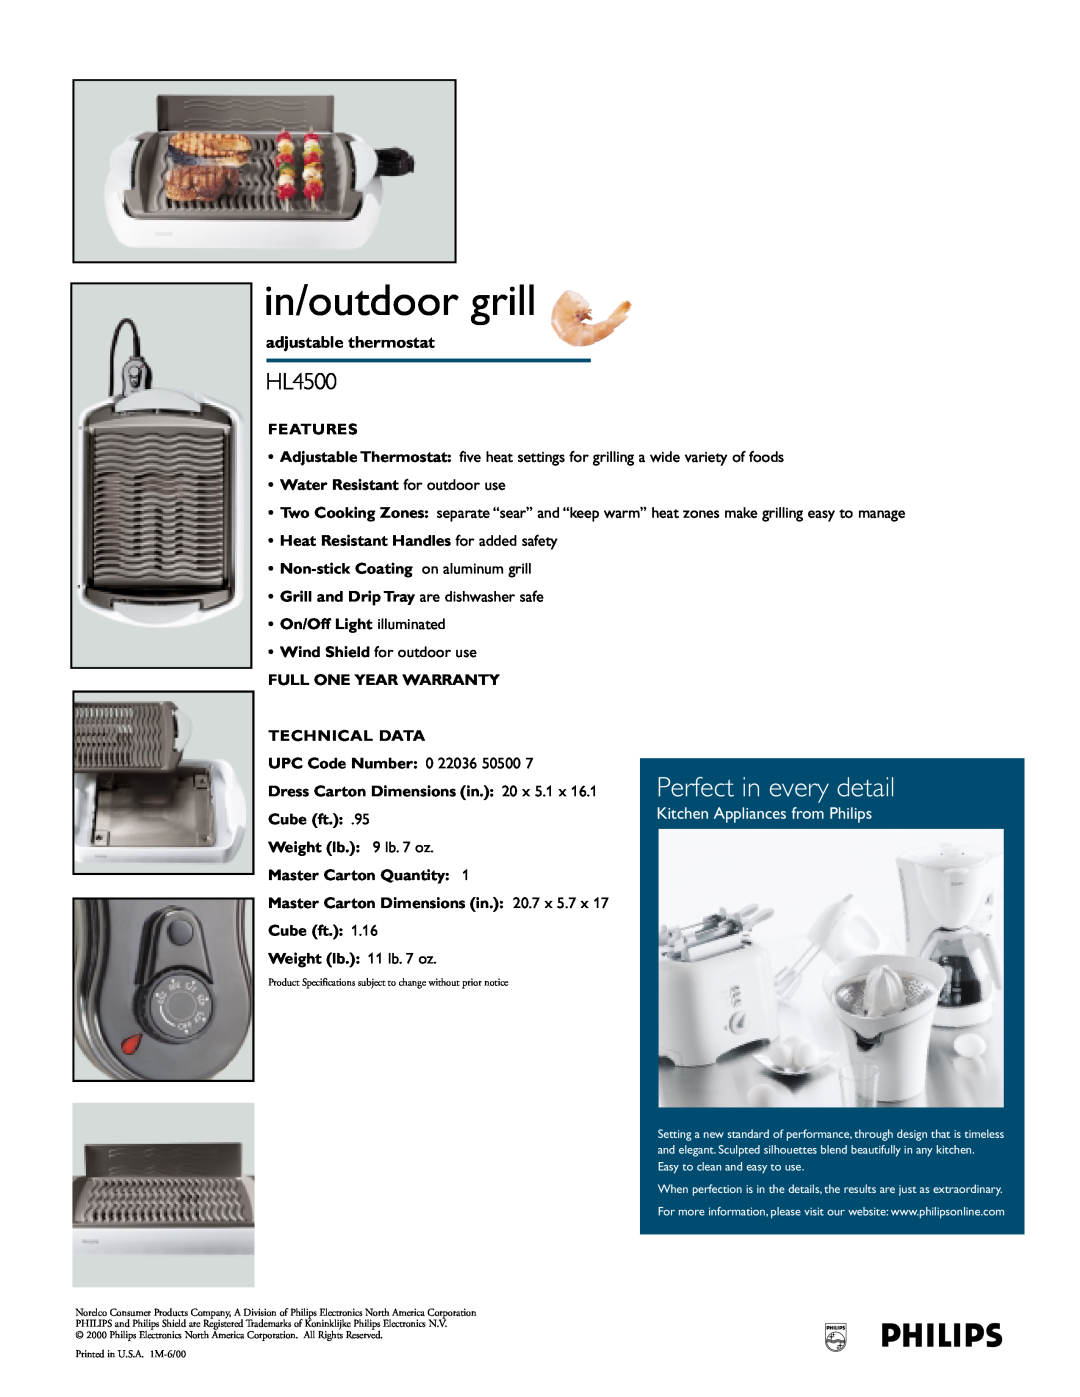 Philips HR1457, hl5231, HR2752 manual in/outdoor grill, Perfect in every detail, HL4500, Kitchen Appliances from Philips 